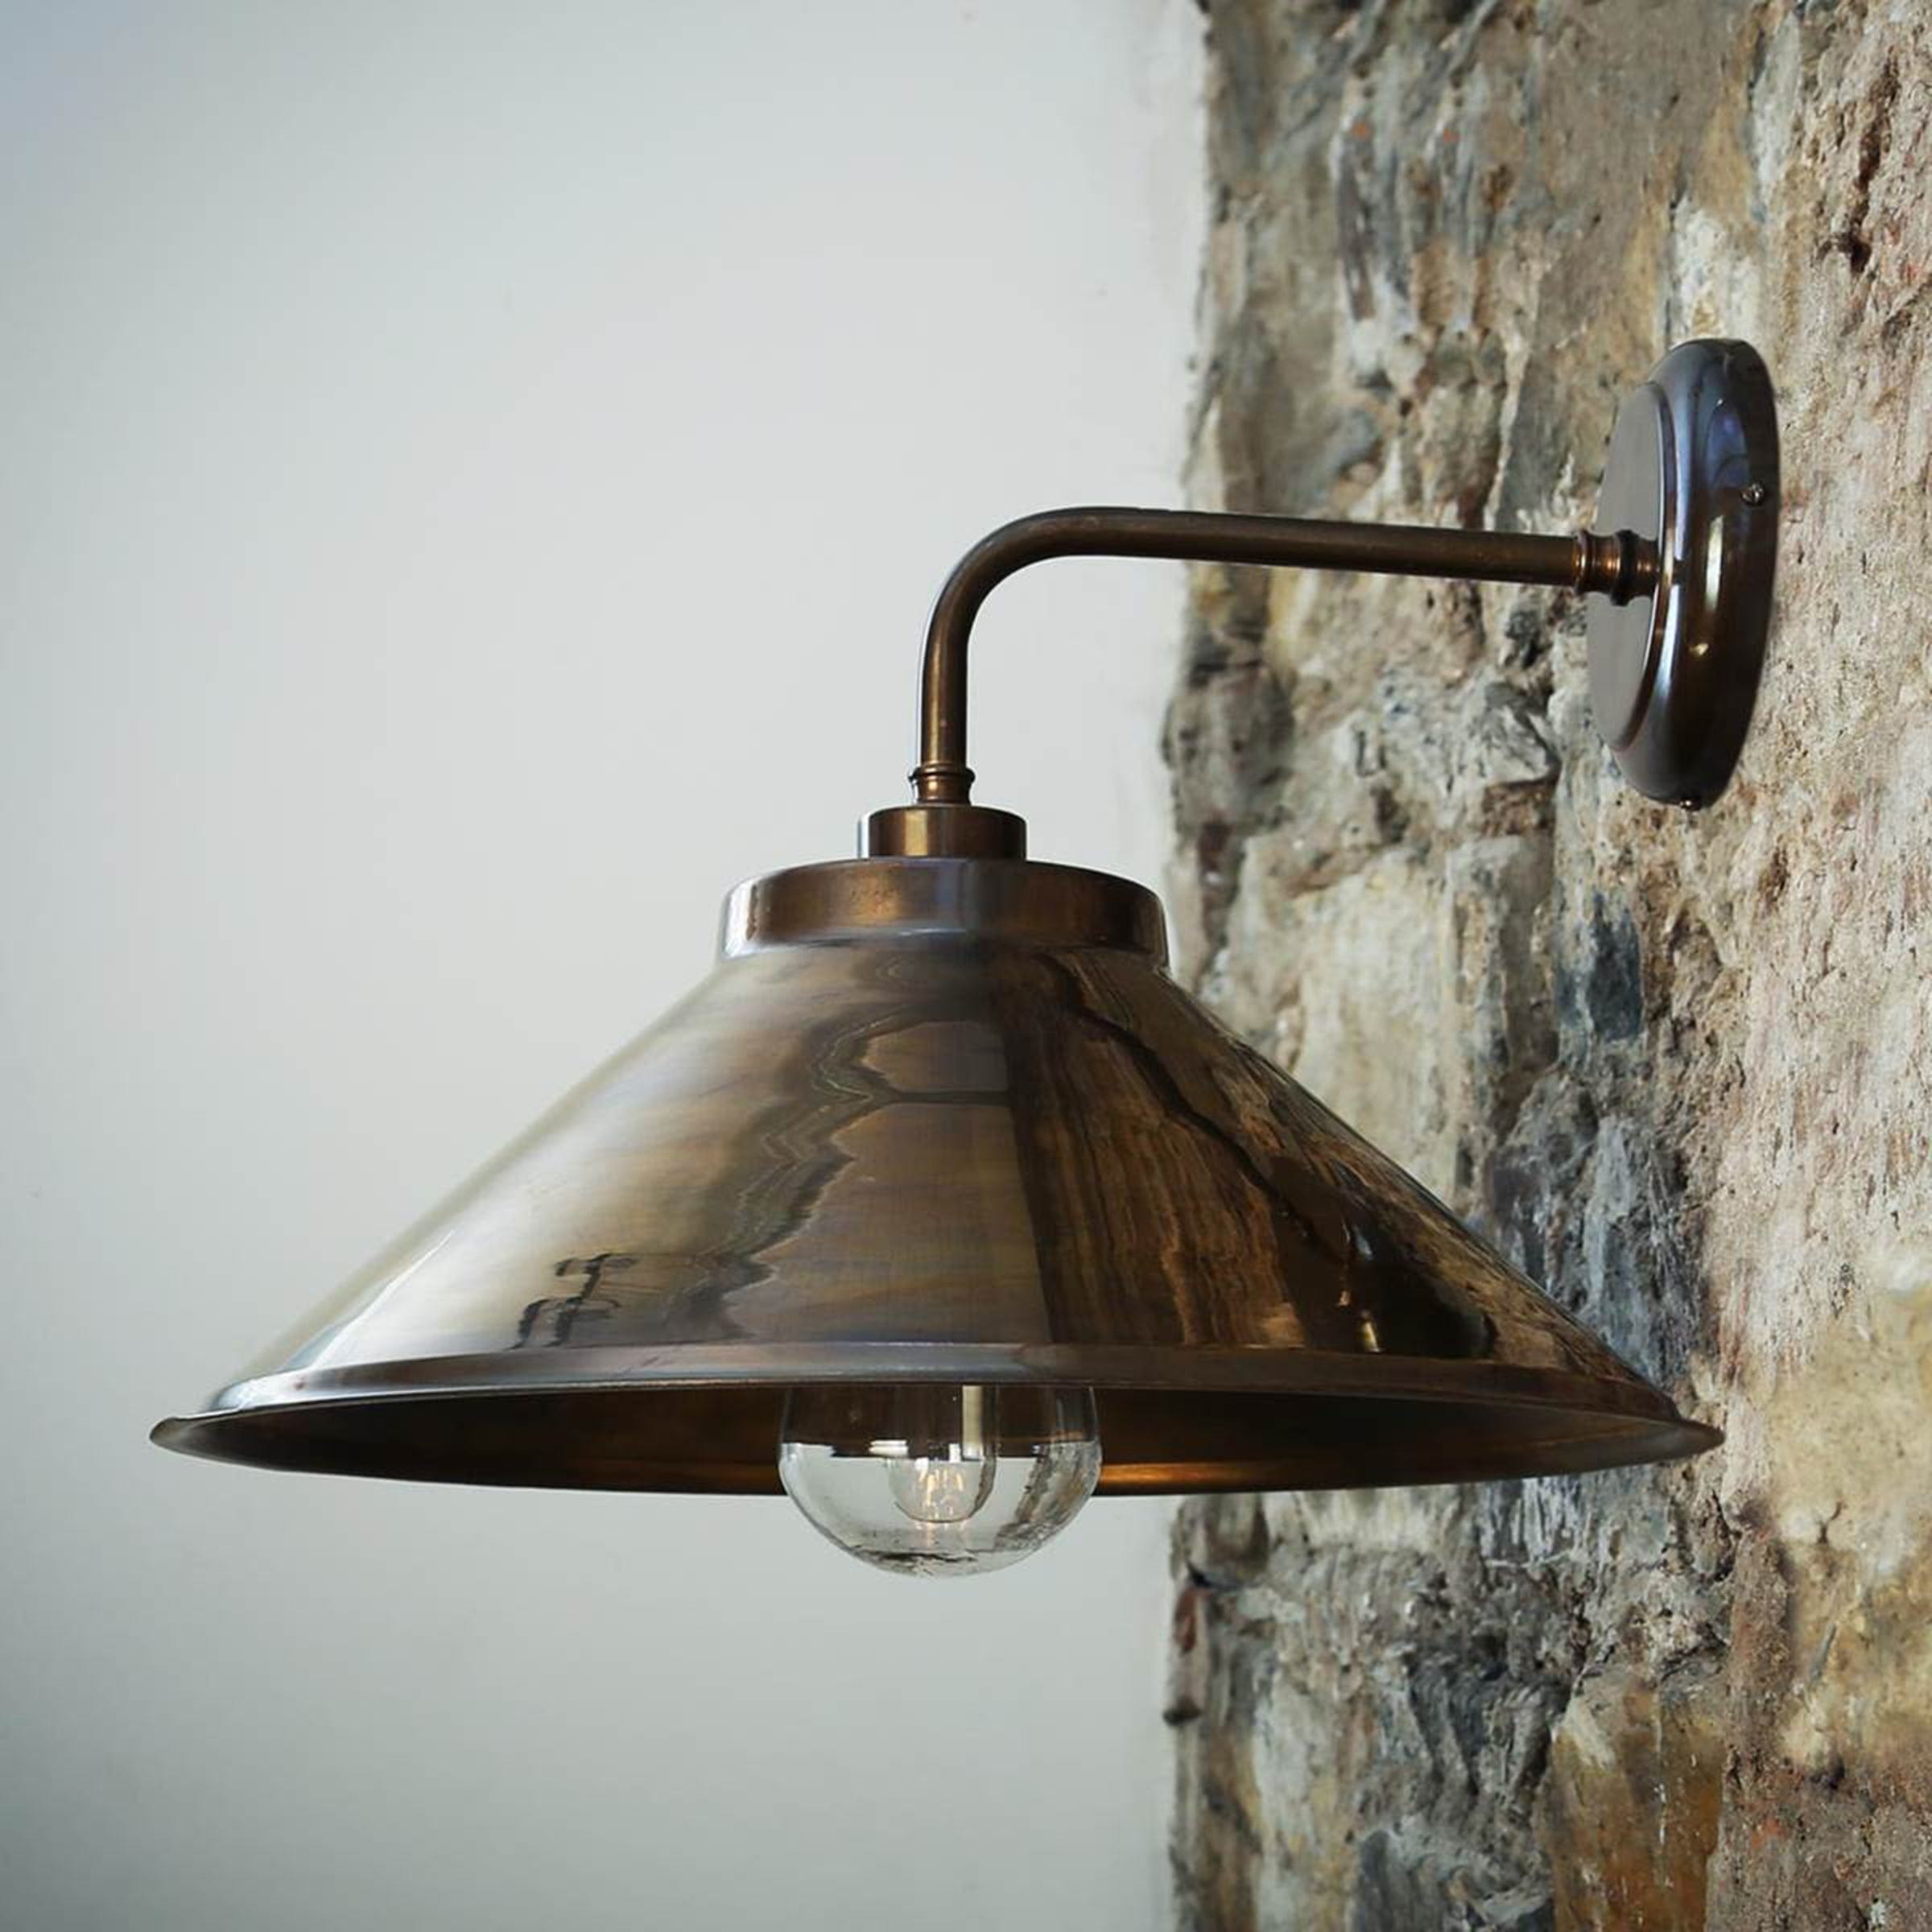 An Outdoor Swan Neck Light You'll Love in 2022 – Asher + Rye